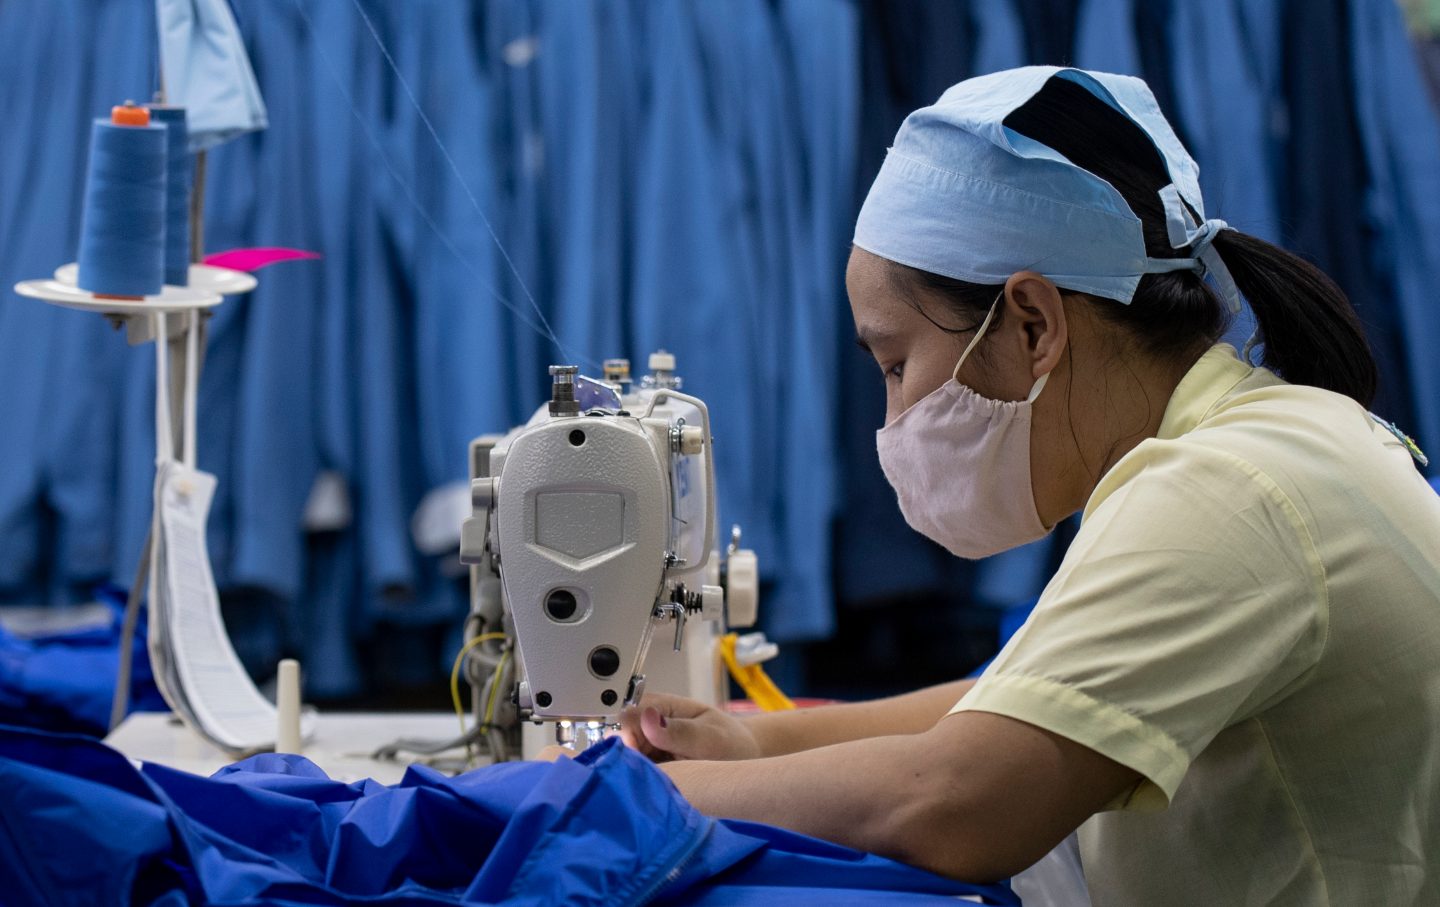 Disaster Looms as the Coronavirus Disrupts the Garment Supply Chain